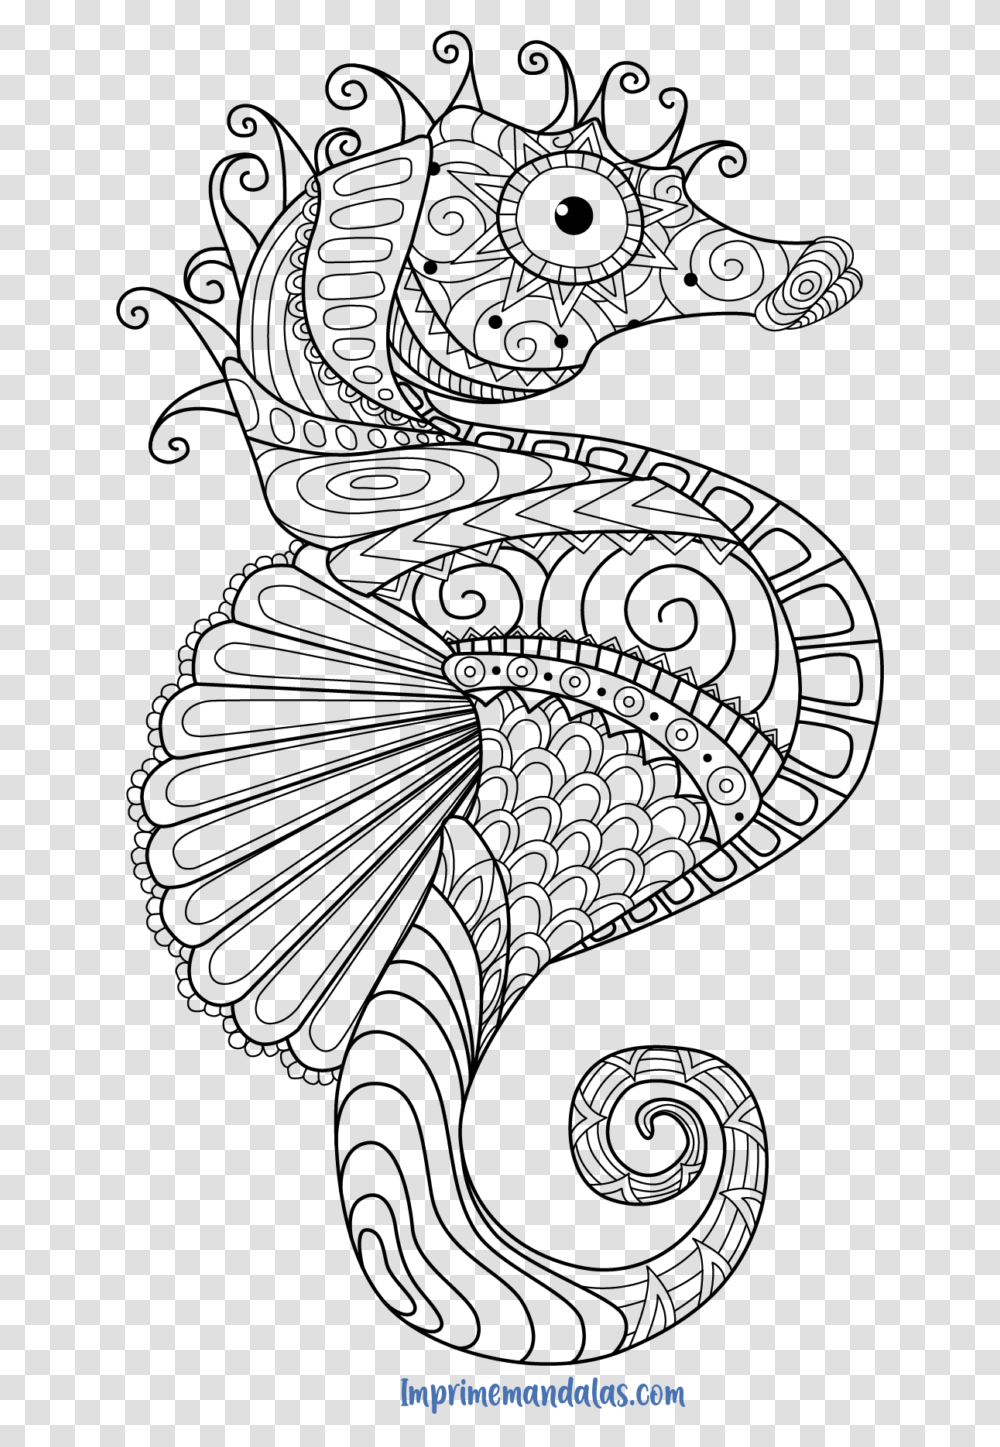 Mandala Caballito De Mar Para Colorear Seahorse Coloring Pages For Adults, Nature, Outdoors, Astronomy, Outer Space Transparent Png